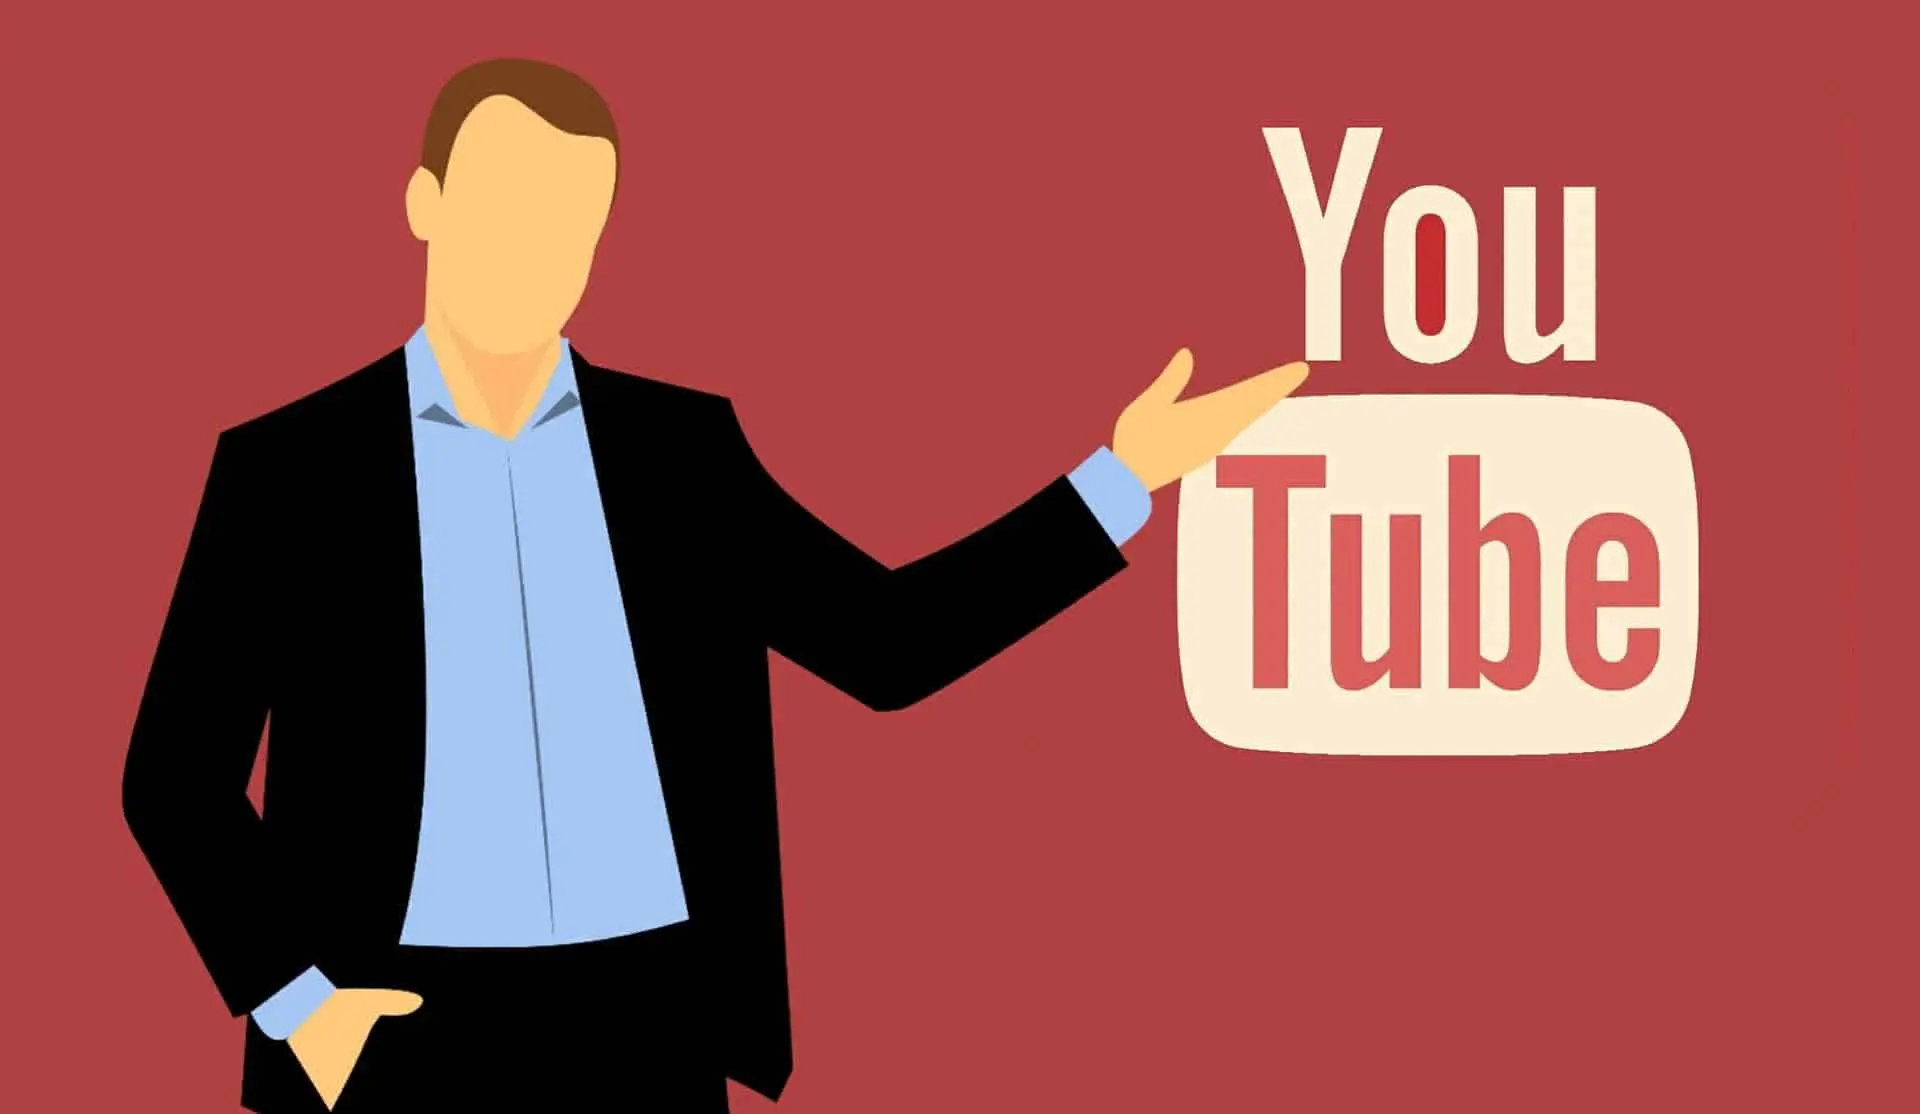 Top 10 YouTube channels in India 2022